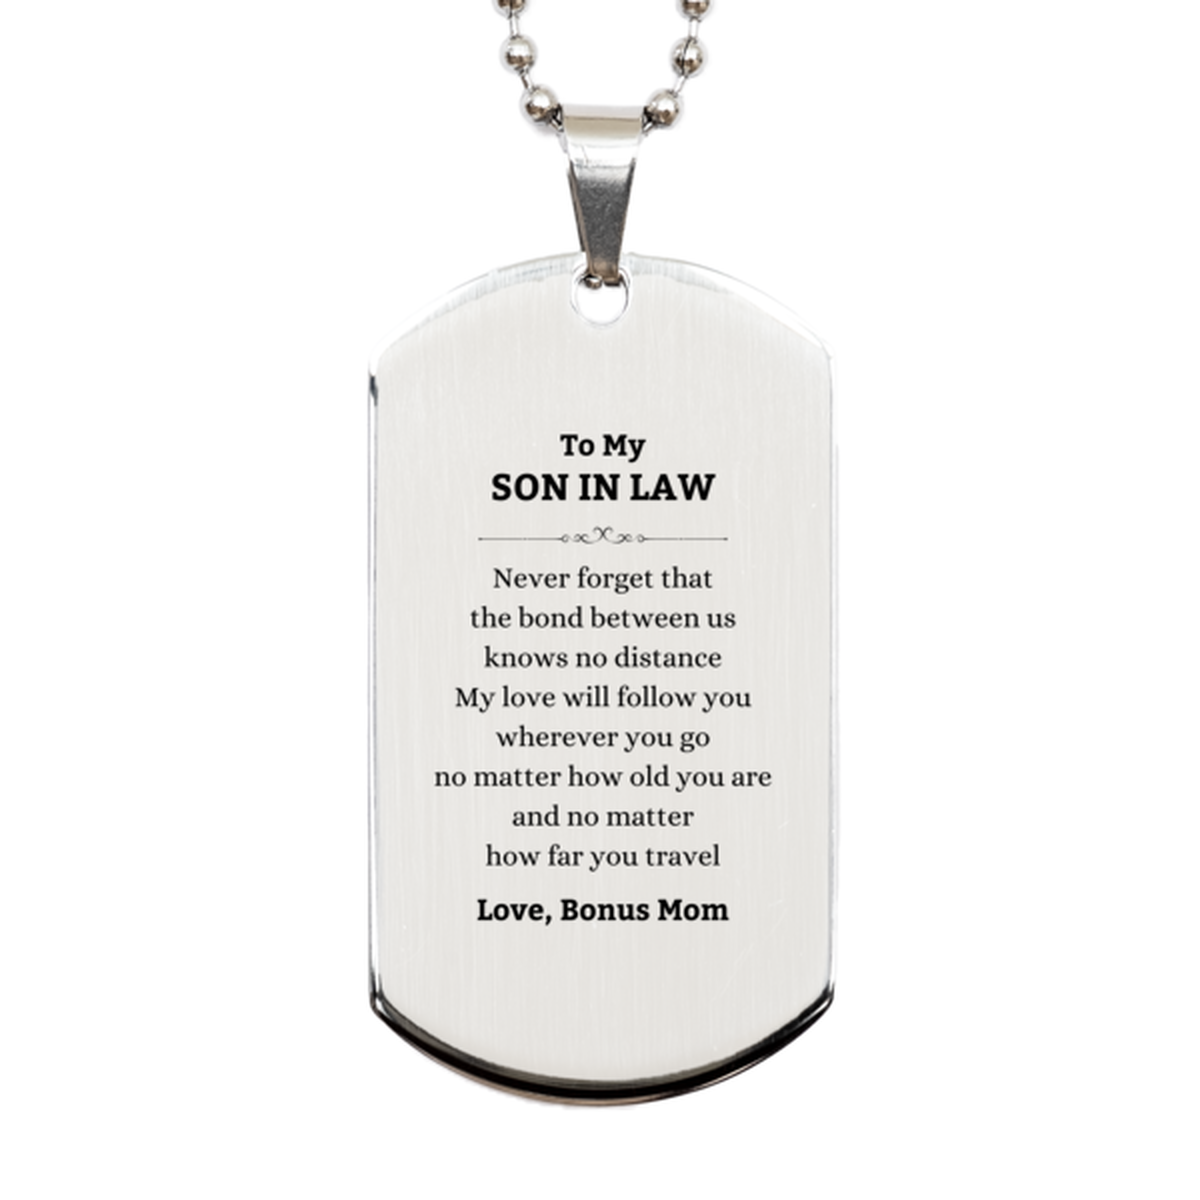 Son In Law Birthday Gifts from Bonus Mom, Adjustable Silver Dog Tag for Son In Law Christmas Graduation Unique Gifts Son In Law Never forget that the bond between us knows no distance. Love, Bonus Mom